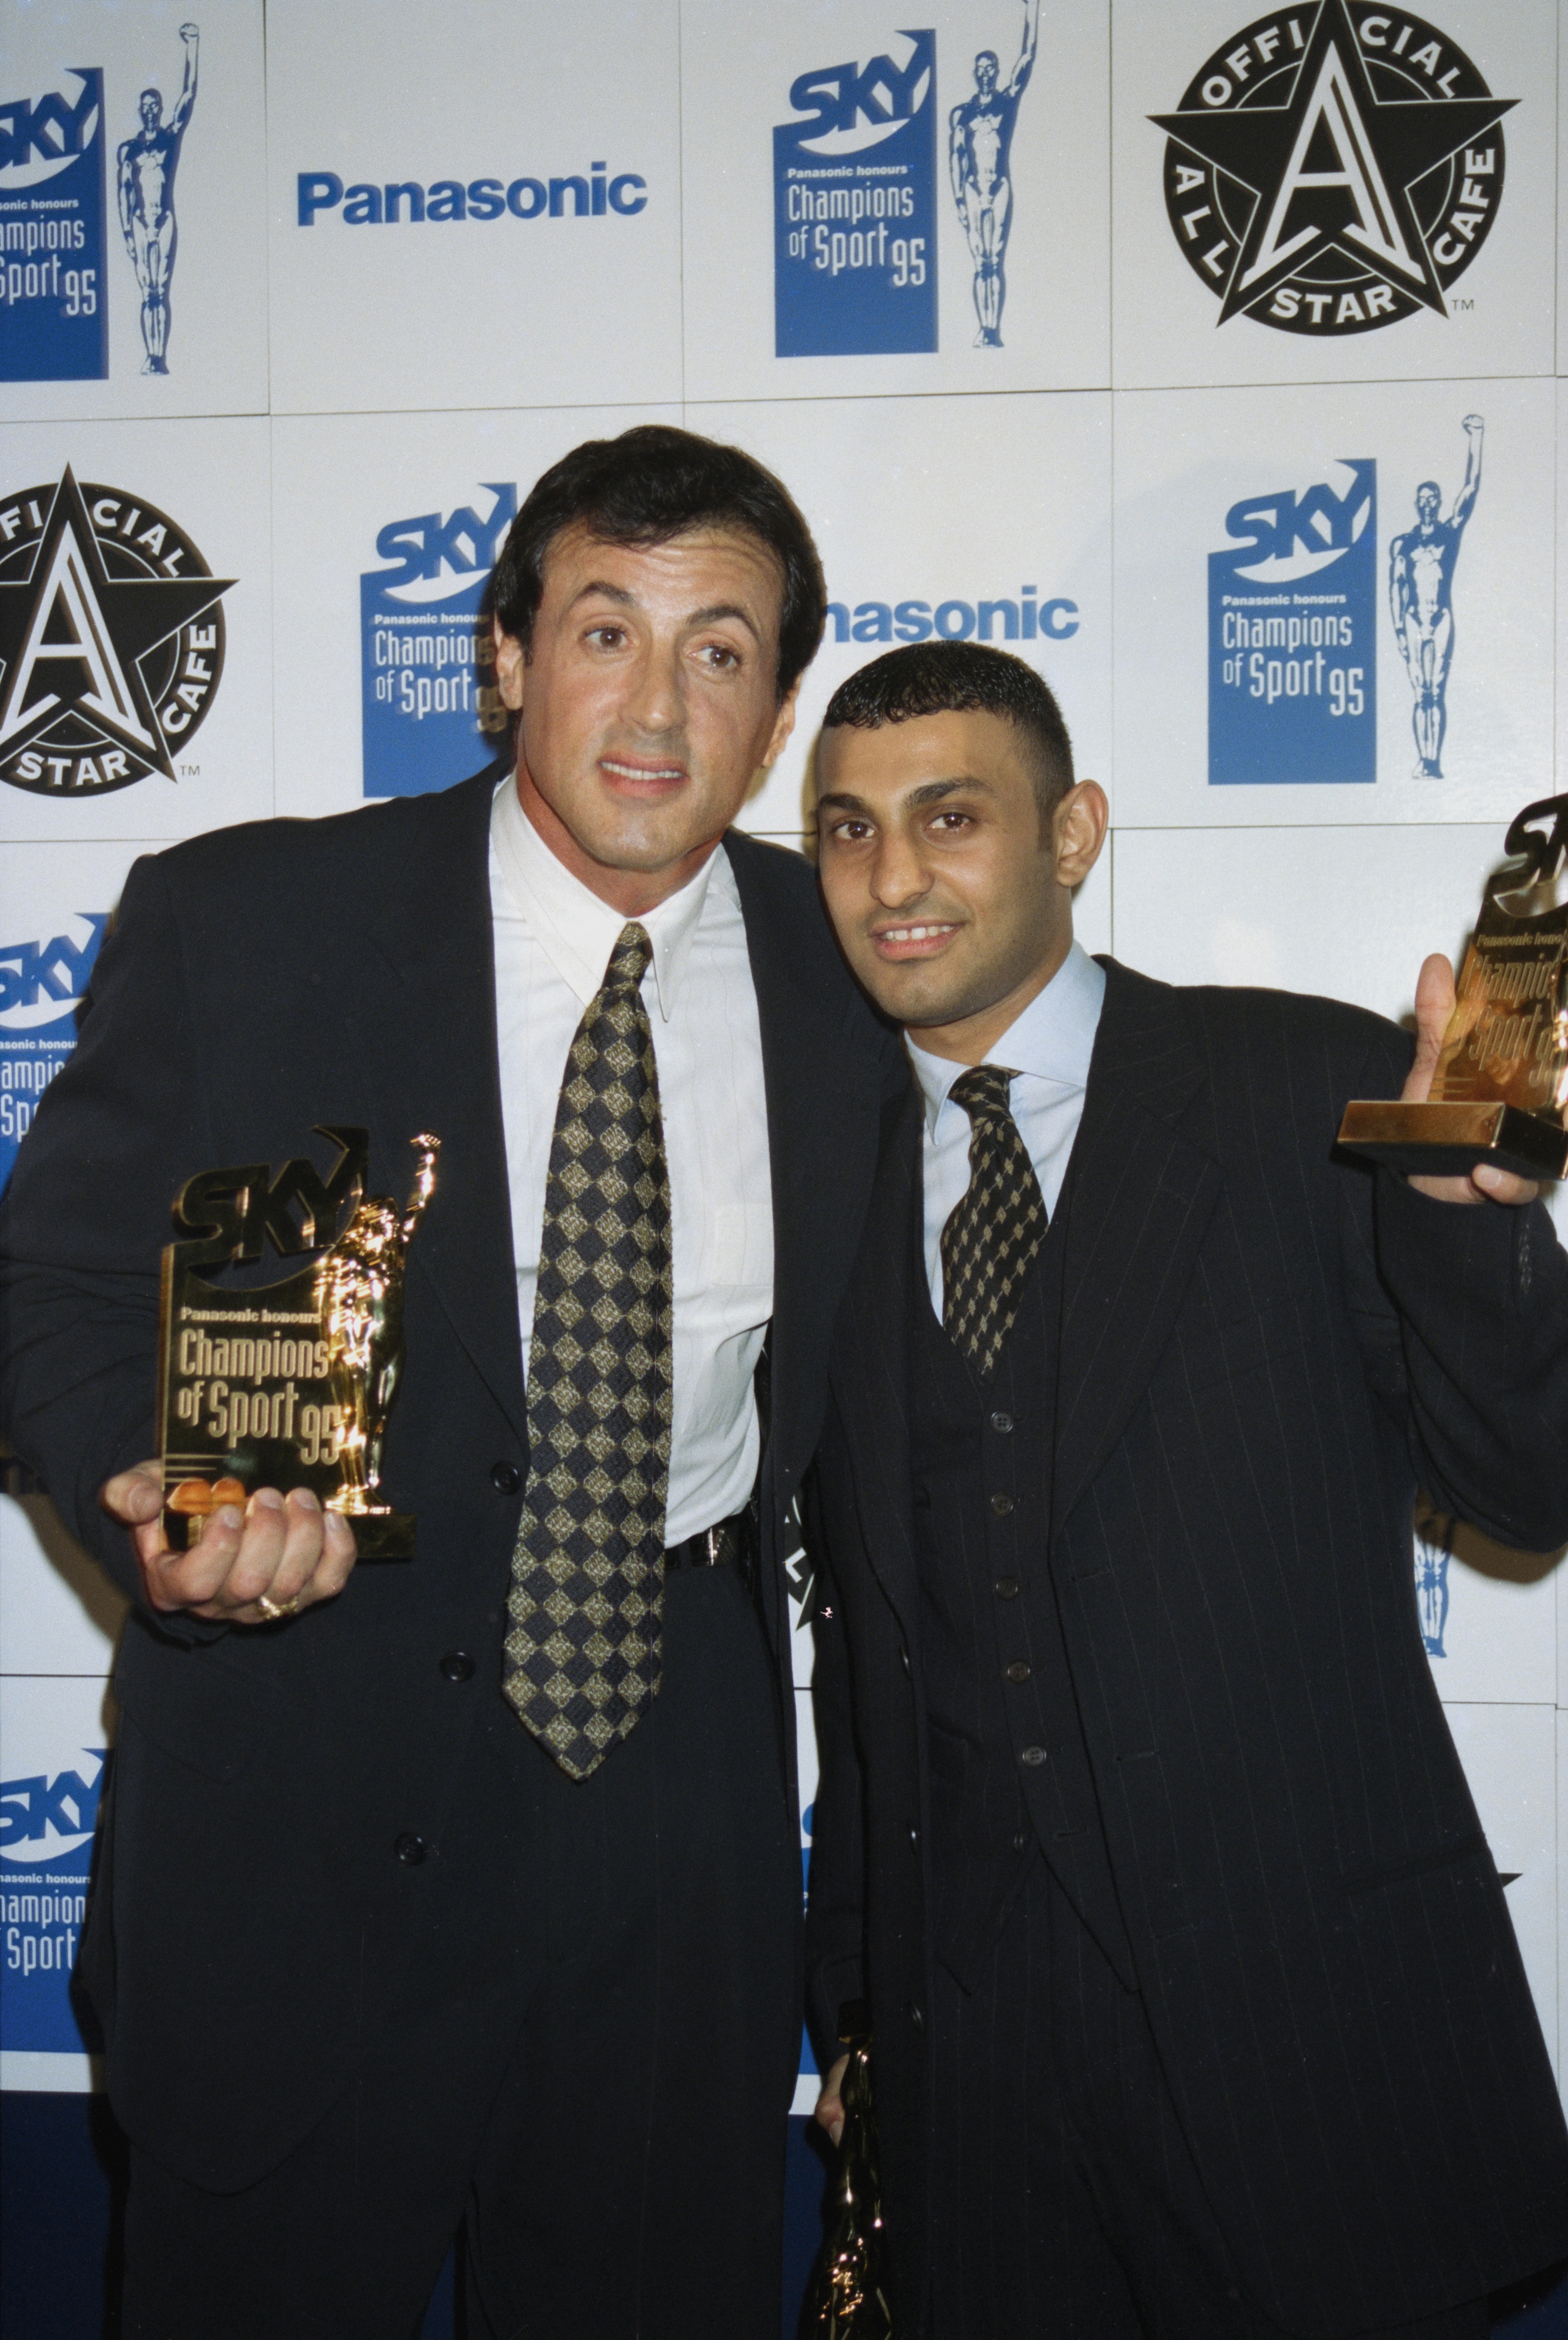 Sylvester Stallone and Naseem Hamed at the Sky Champions of Sport event on January 1, 1996 in London, England. | Source: Getty Images